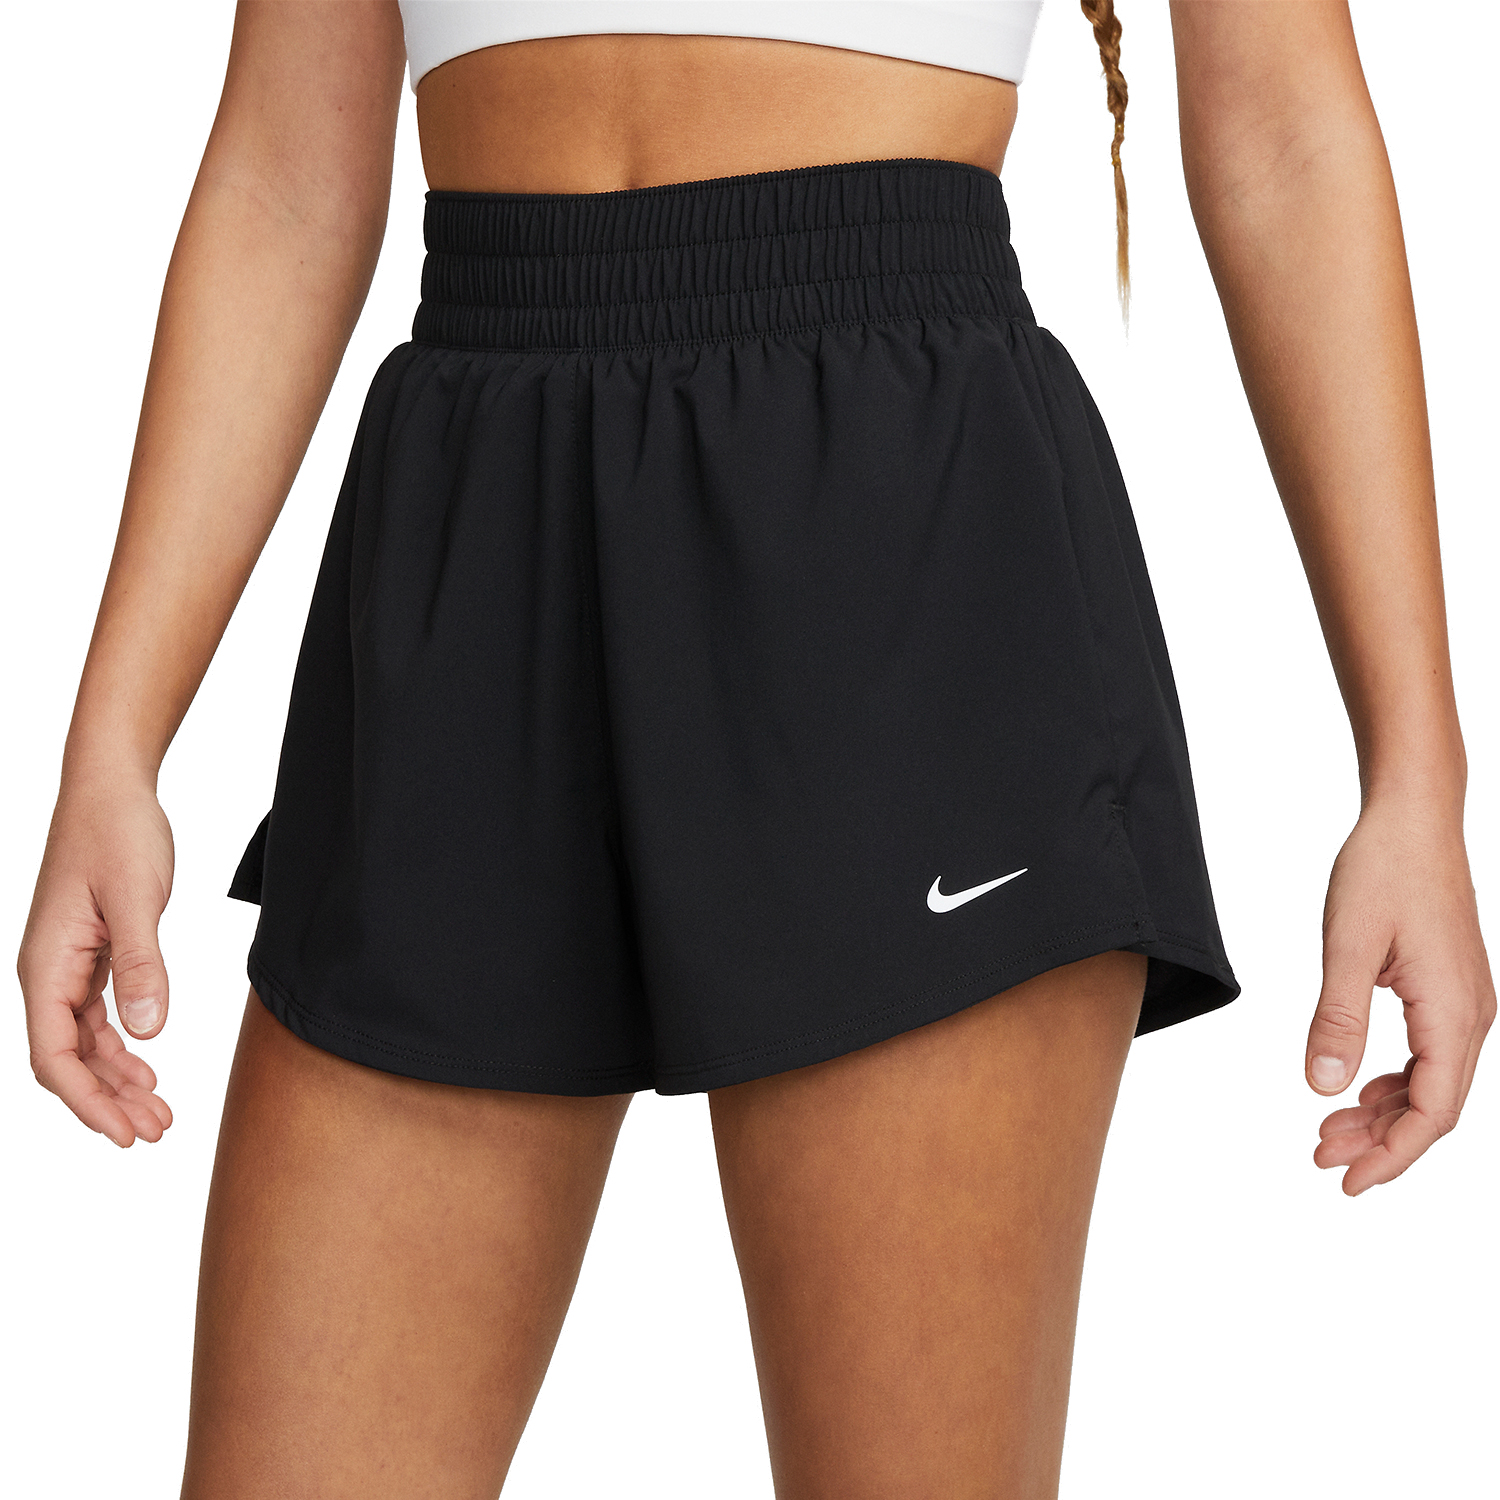 Nike Dri-FIT One 2 in 1 3in Shorts - Black/Reflective Silver